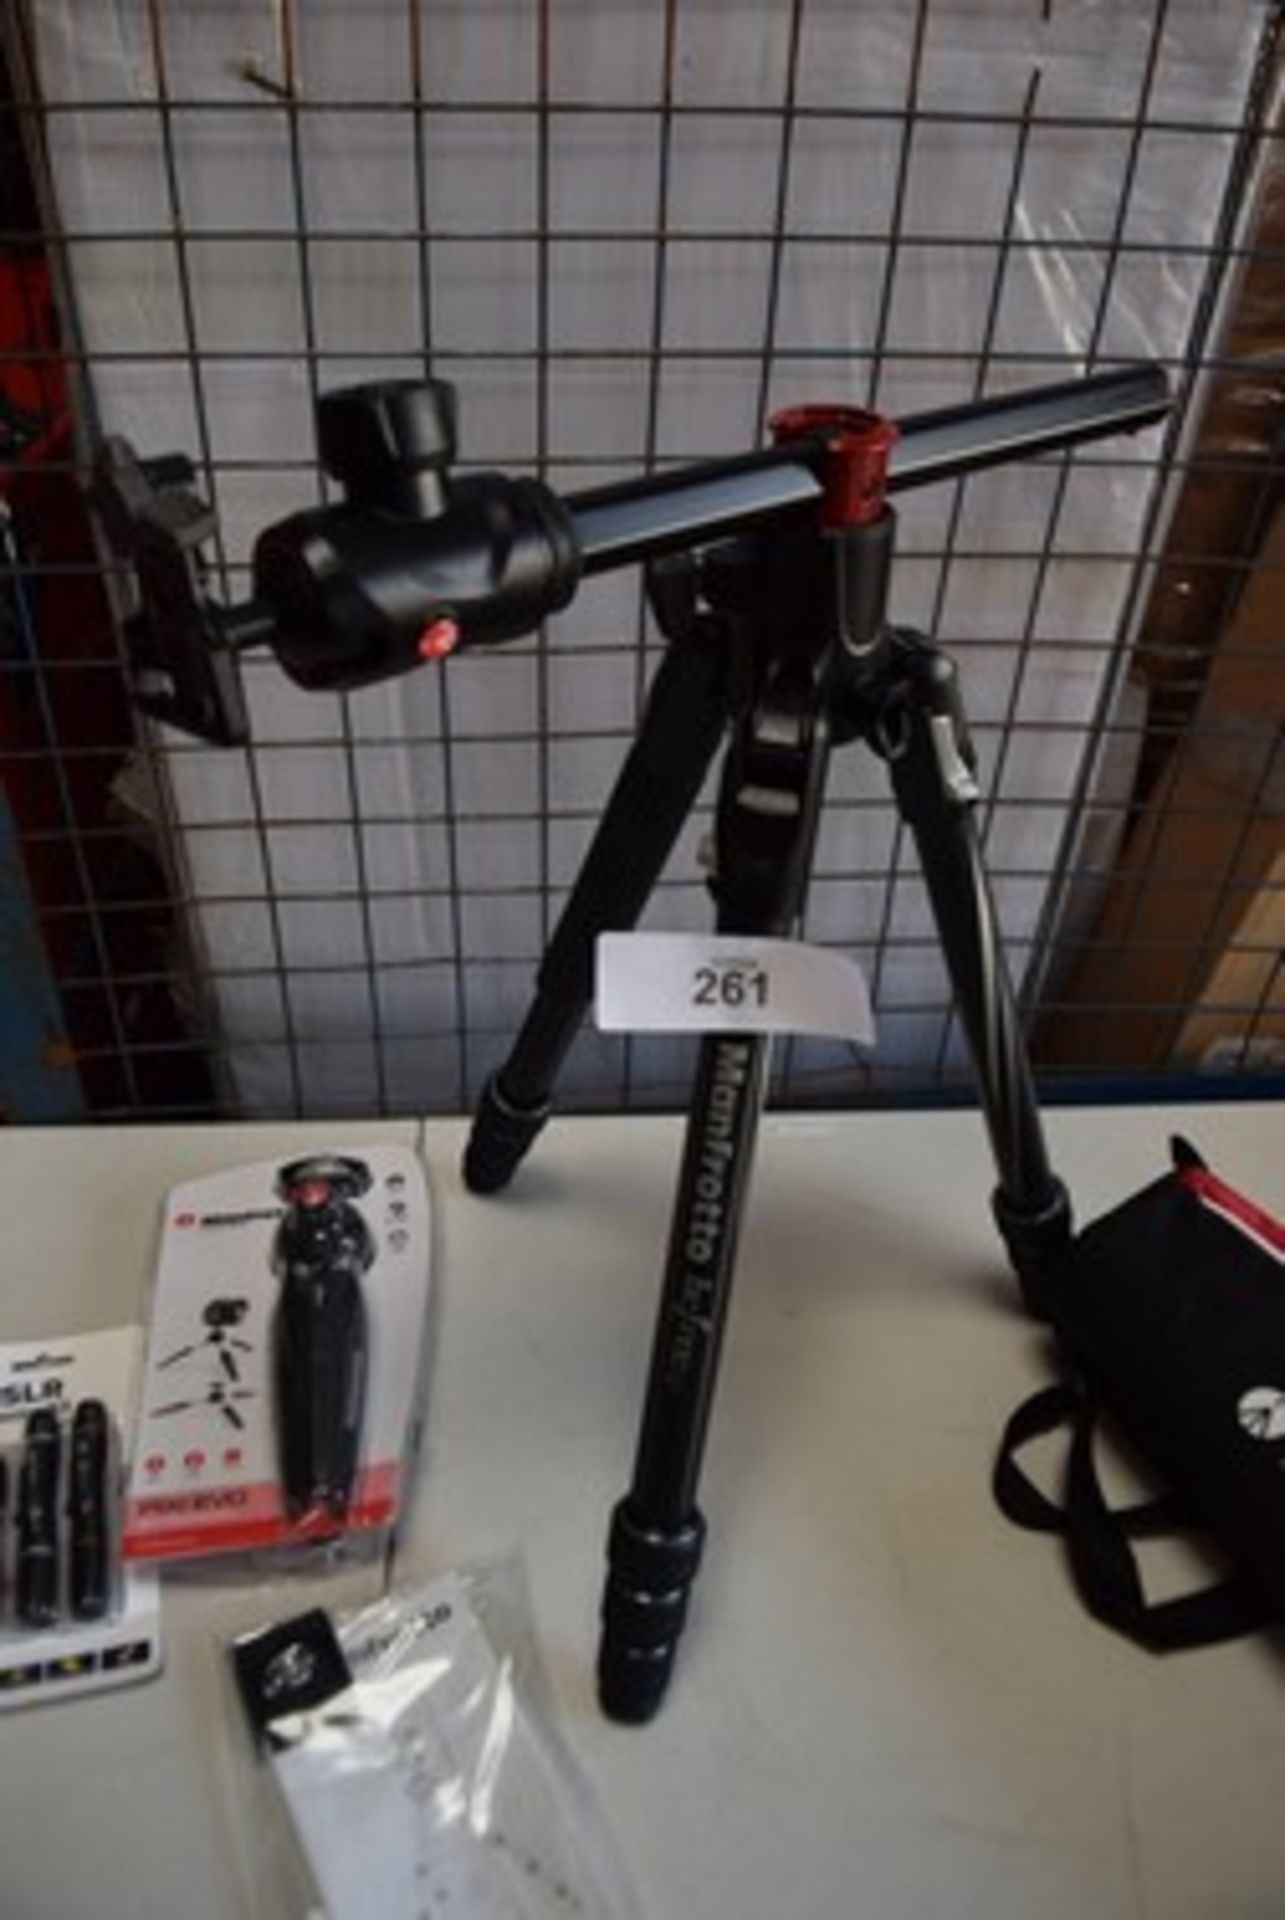 1 x Manfrotto Befree GT Xpro aluminium tripod, in carry bag, item No: MKBFRA4GTXP-BH, together - Image 3 of 4